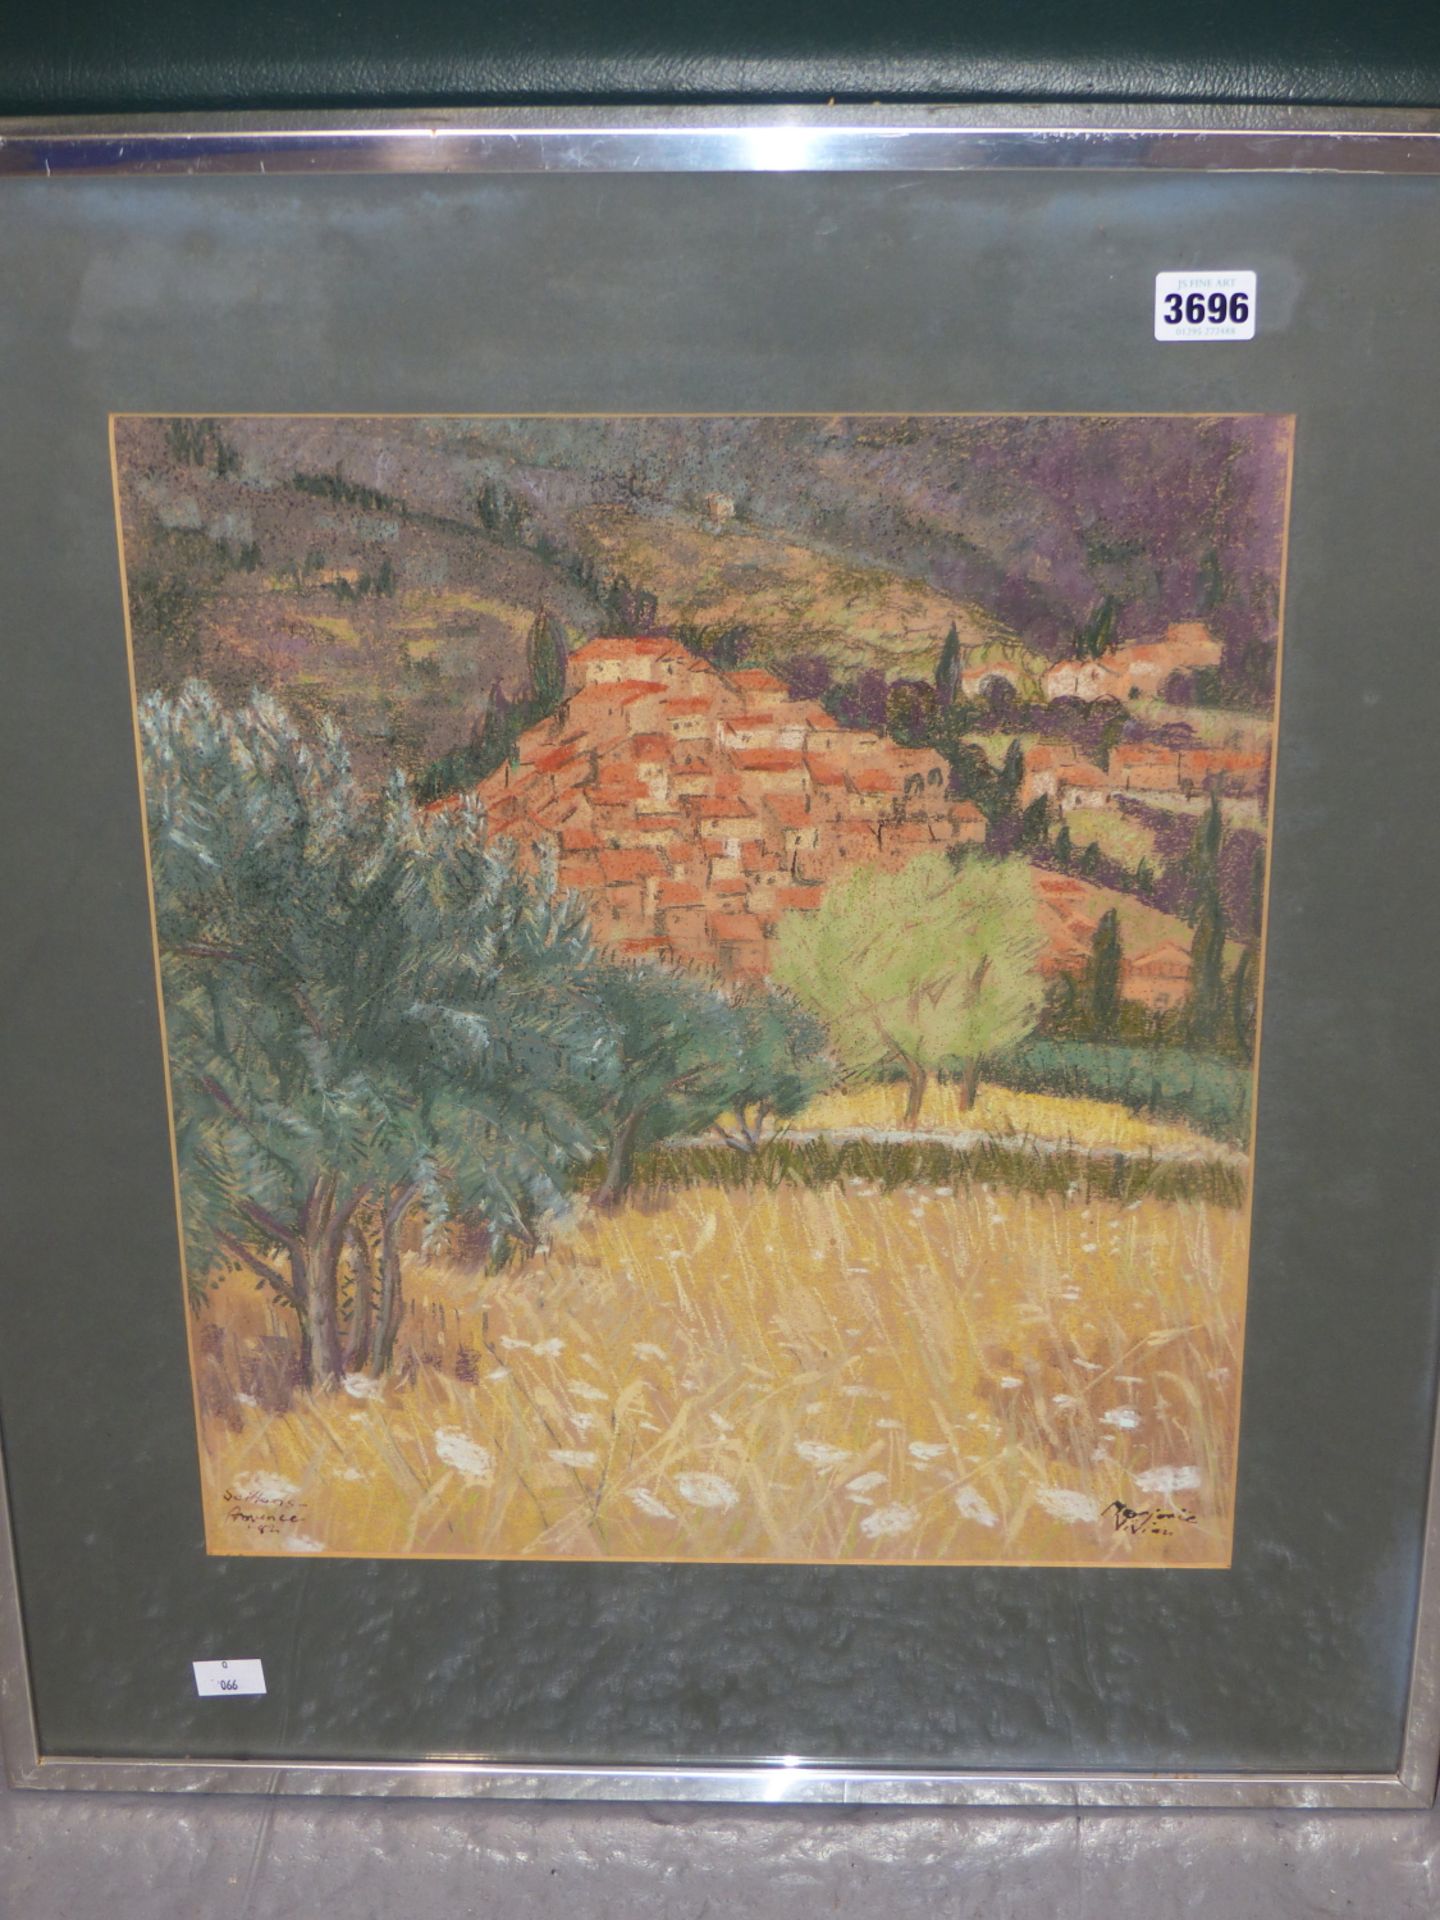 MARJORIE VIVIAN (20TH CENTURY) ARR. SEILLANS, PROVENCE. PASTEL. SIGNED AND TITLED, DATED '82. 38 X - Image 2 of 6